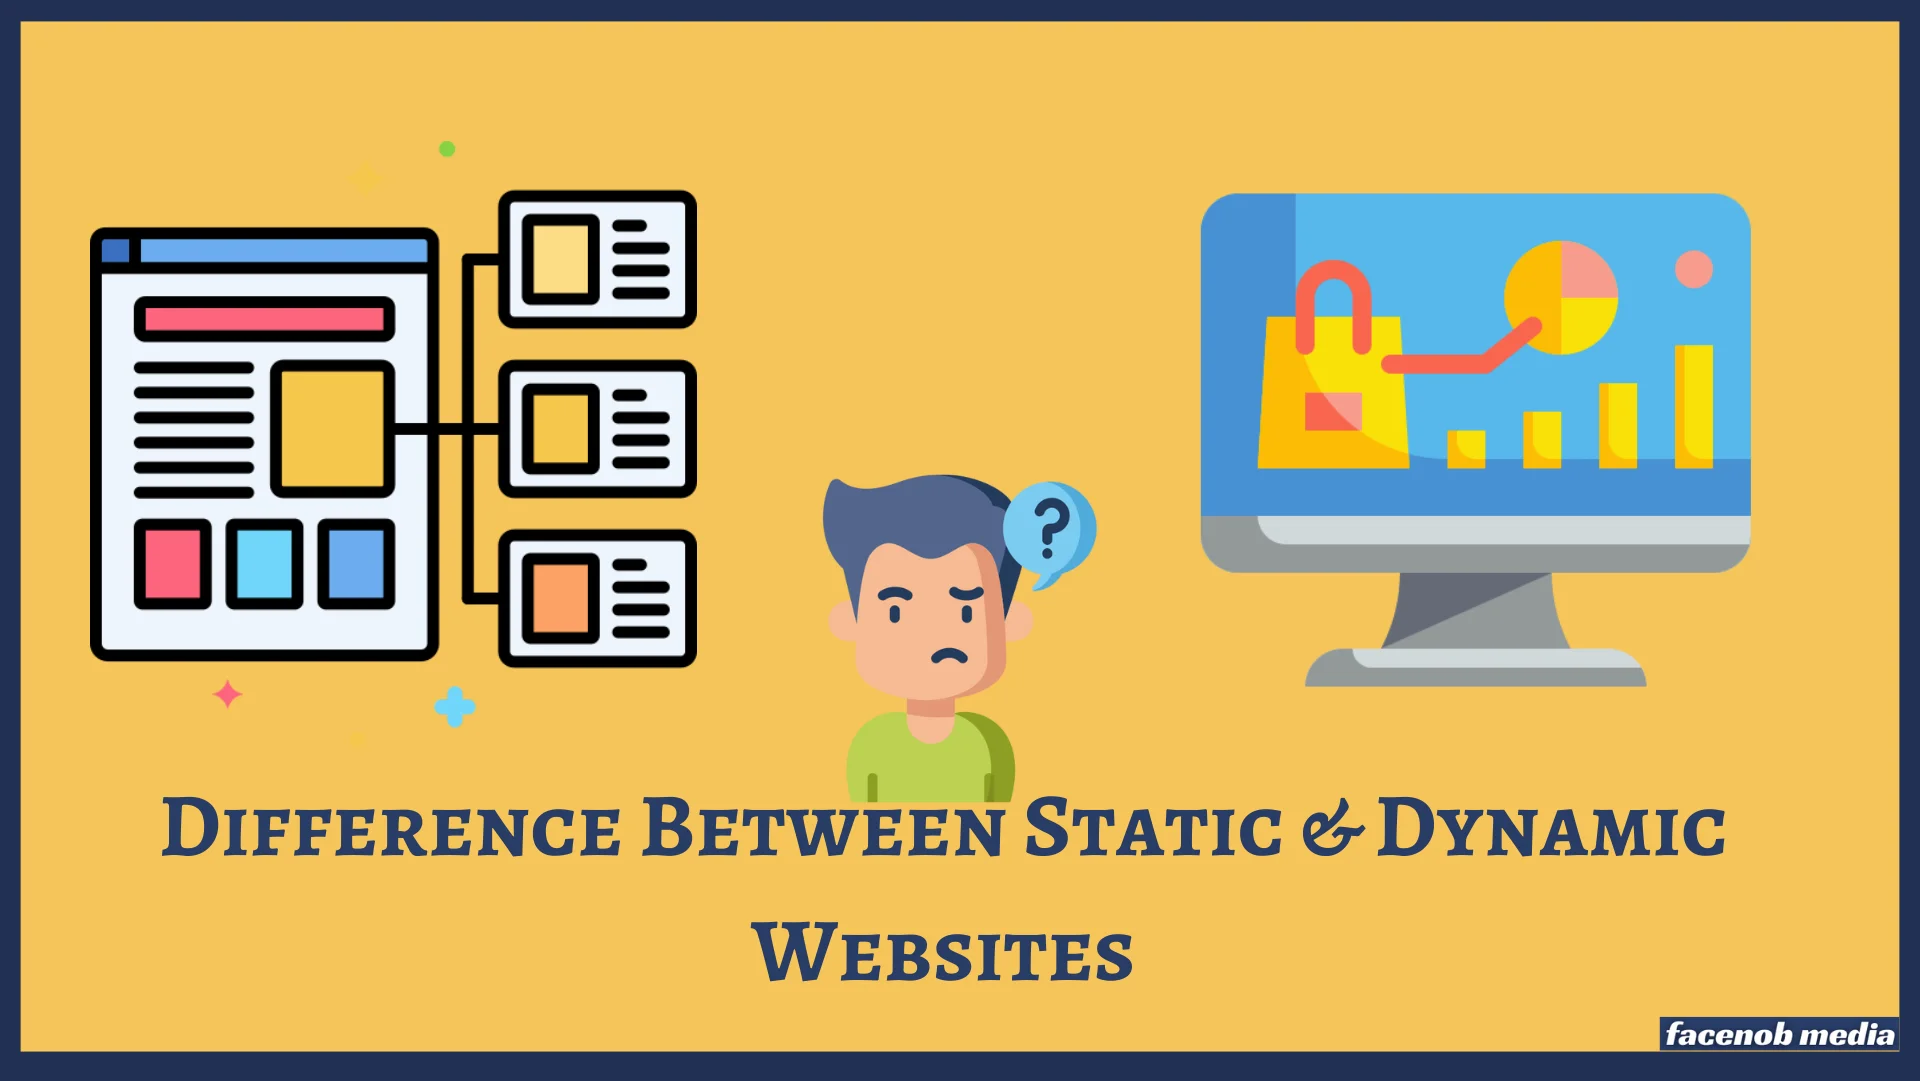 What is The Difference Between Static & Dynamic Websites?